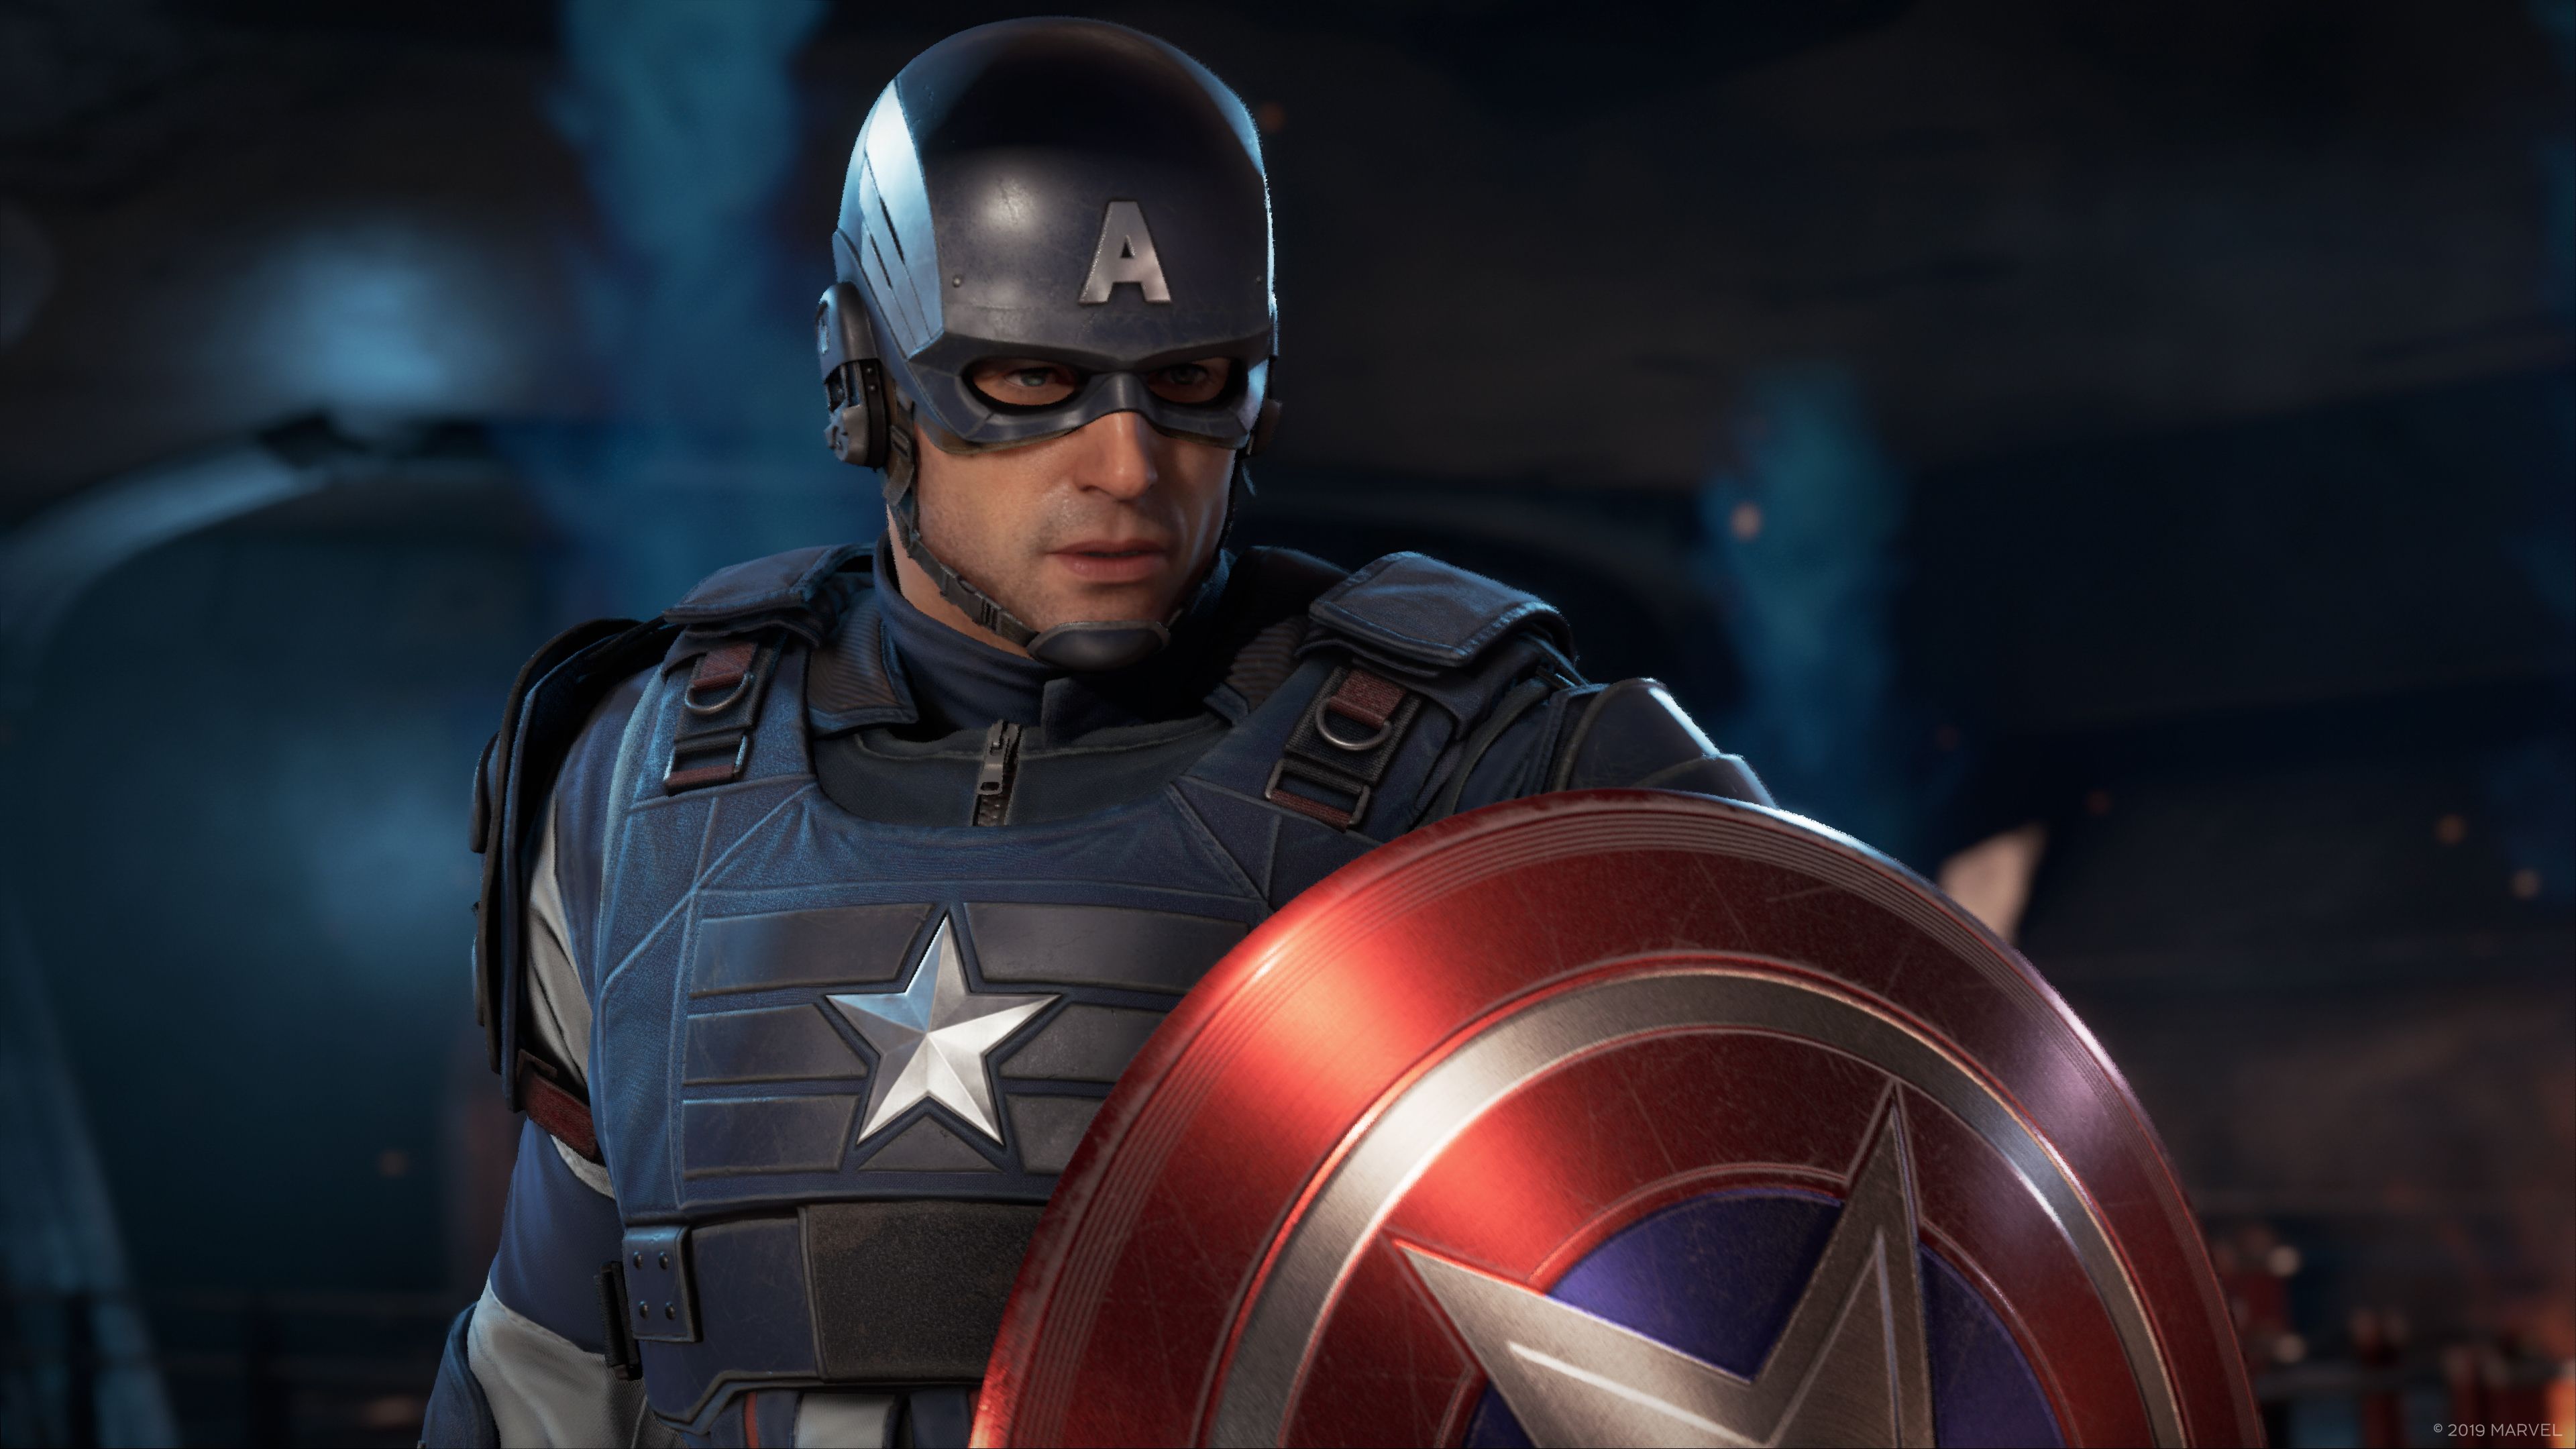 Marvels Avengers Captain America Wallpaper, HD Games 4K Wallpaper, Image, Photo and Background